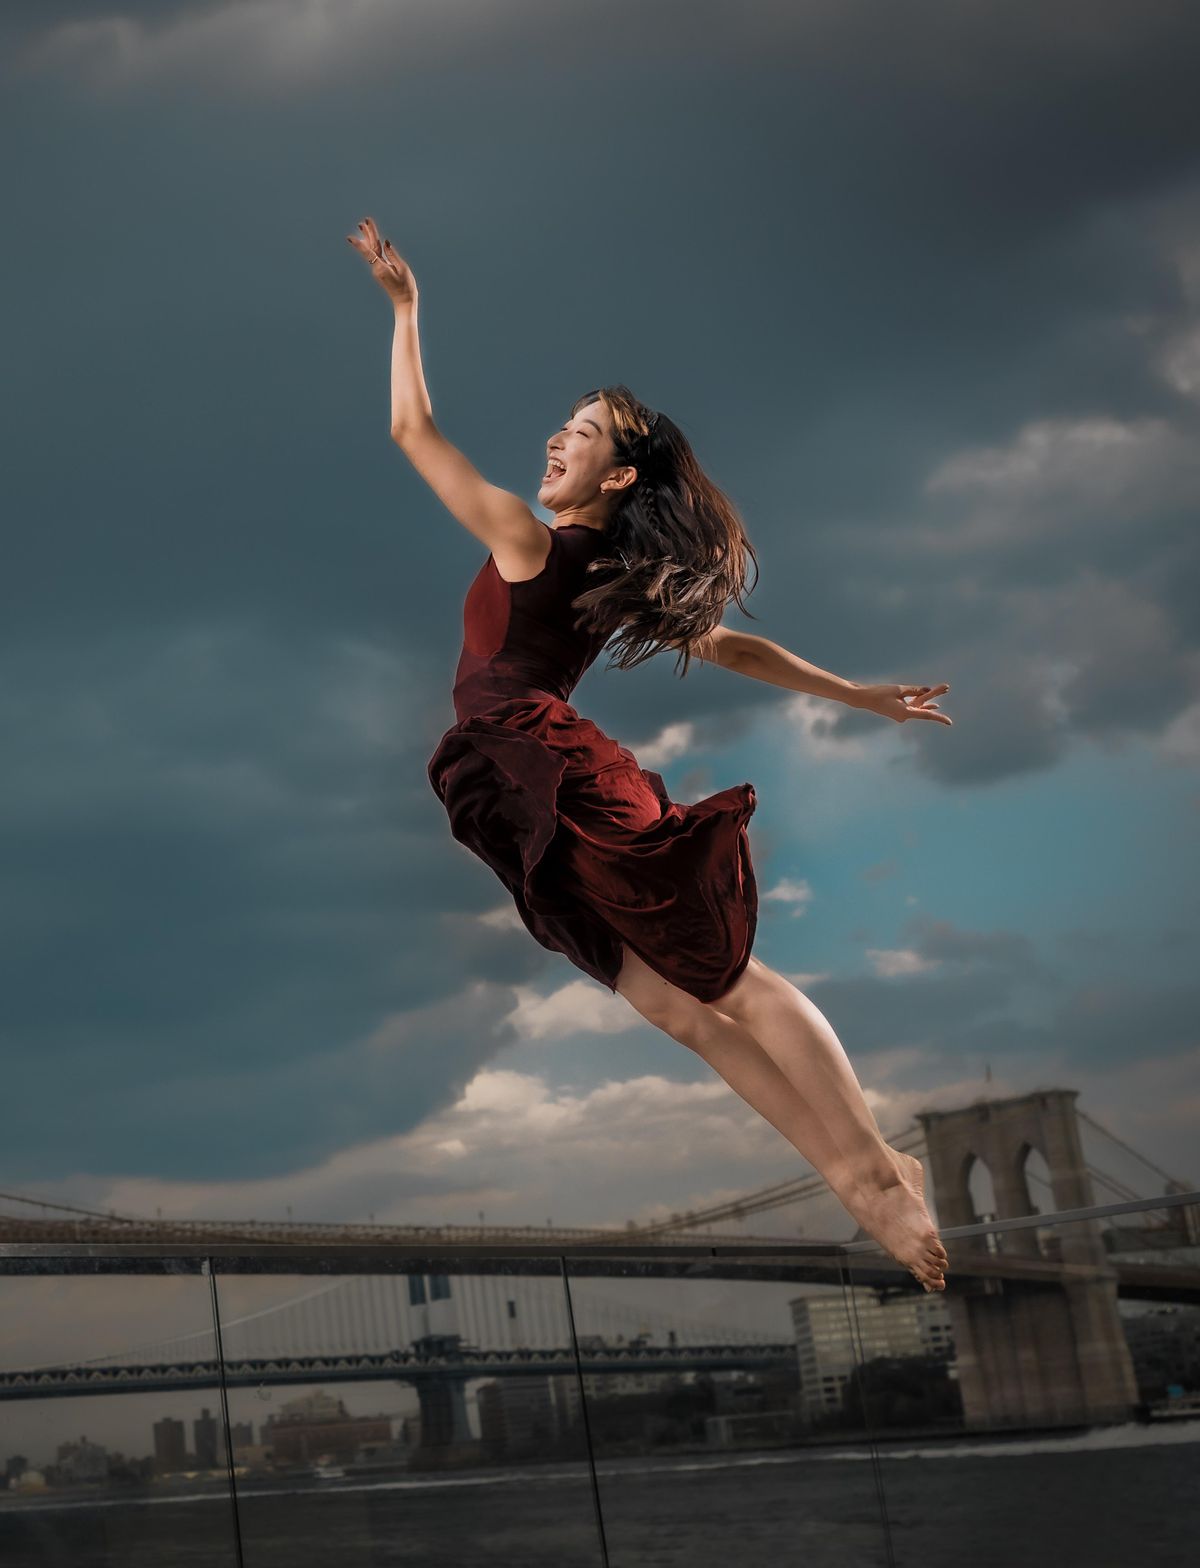 AAPI Dance Festival at APAP, Jan 15 Ailey Citigroup Theater, The Ailey